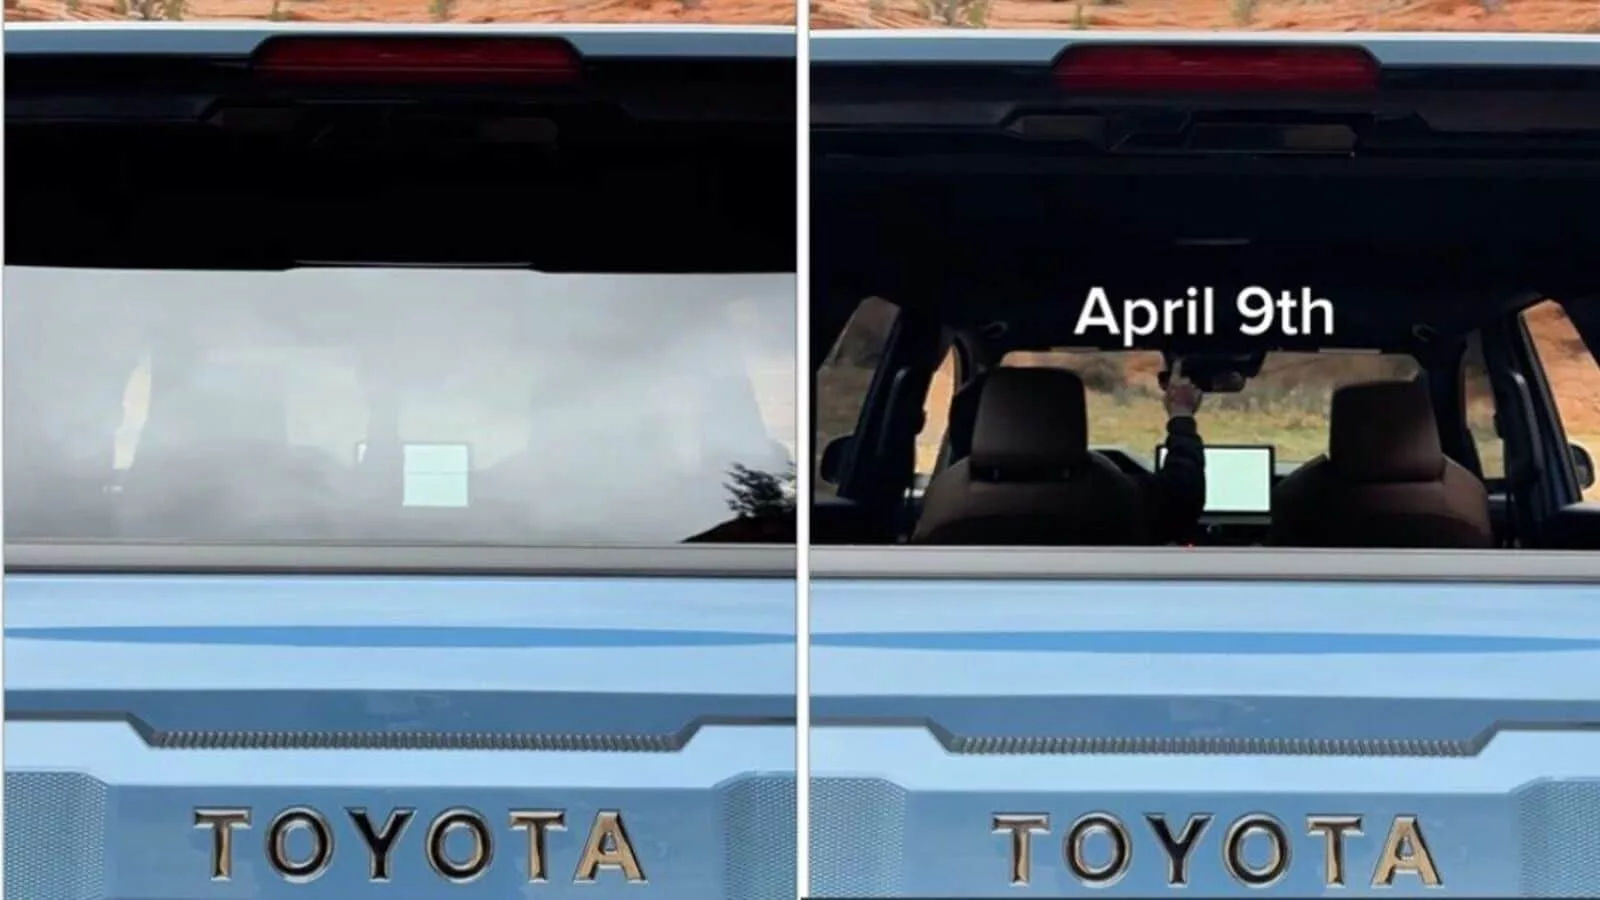 Toyota's upcoming 4Runner SUV will get a roll-down rear window, debut soon